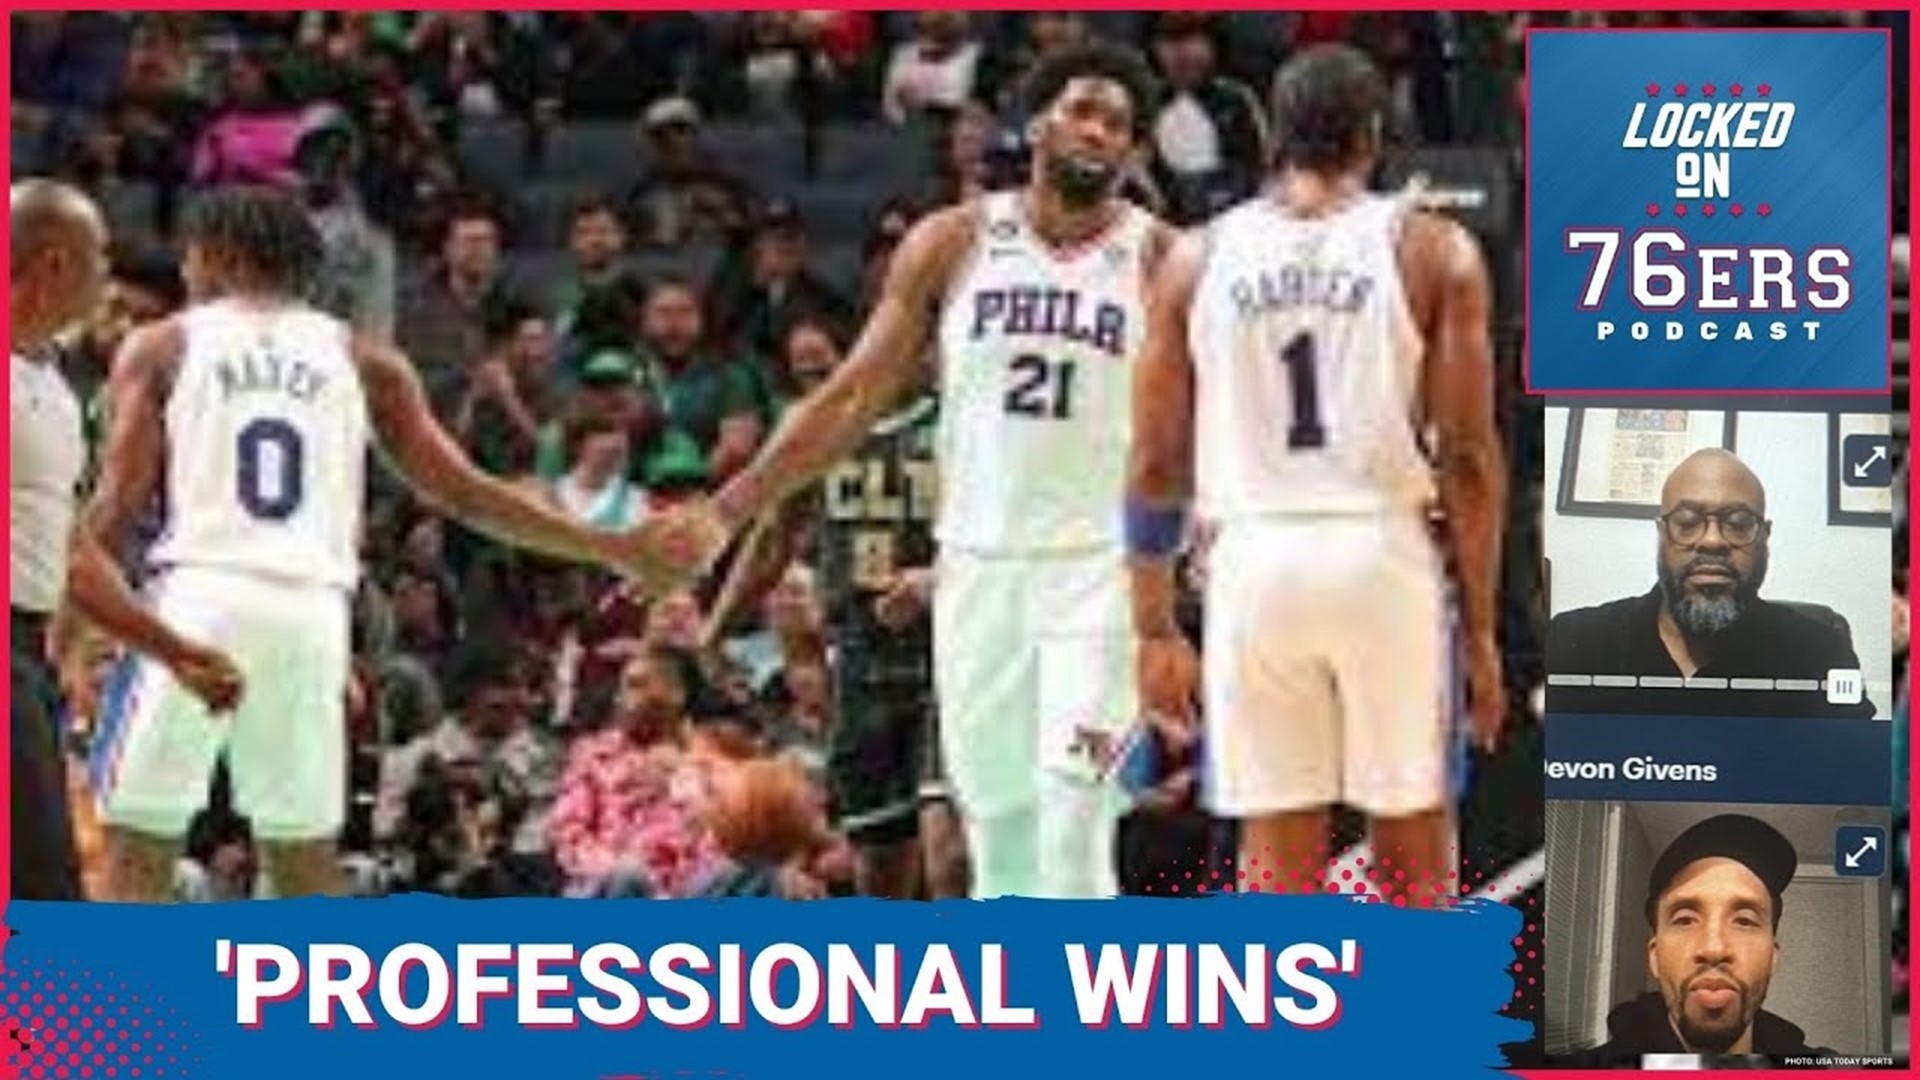 The 76ers have been on a roll, posting the league's best active winning streak of eight games.